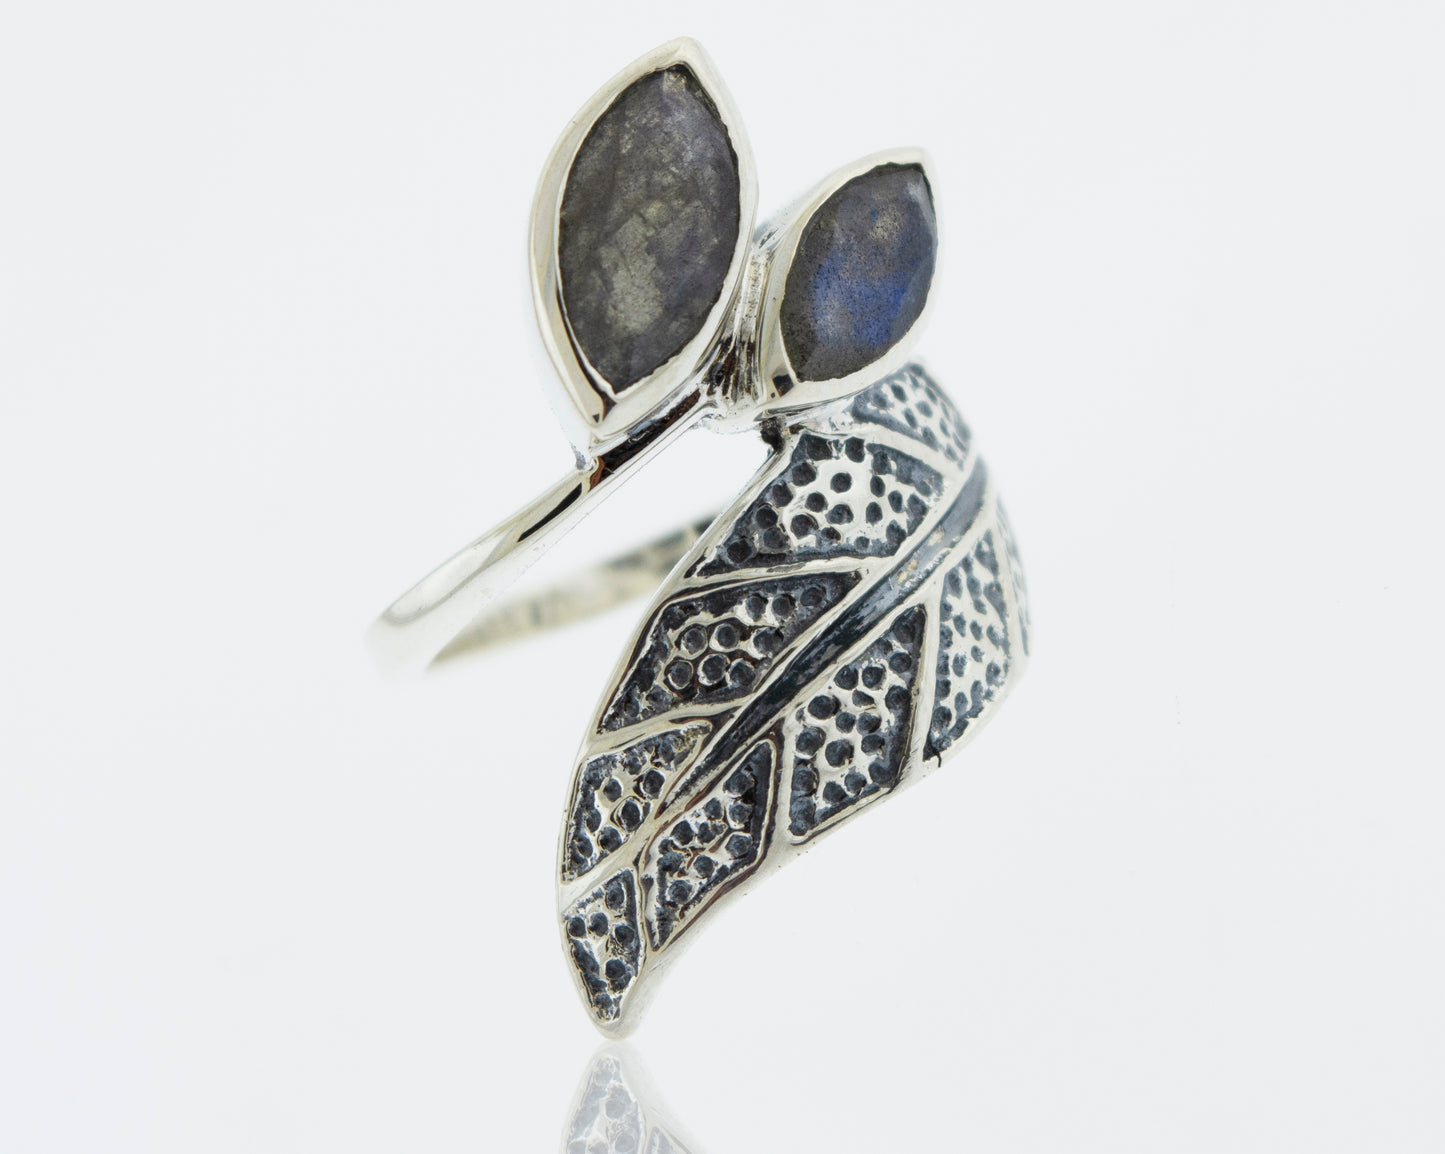 
                  
                    A Super Silver Leaf Ring with Labradorite adorned with two exquisite leaves and a mesmerizing labradorite stone.
                  
                